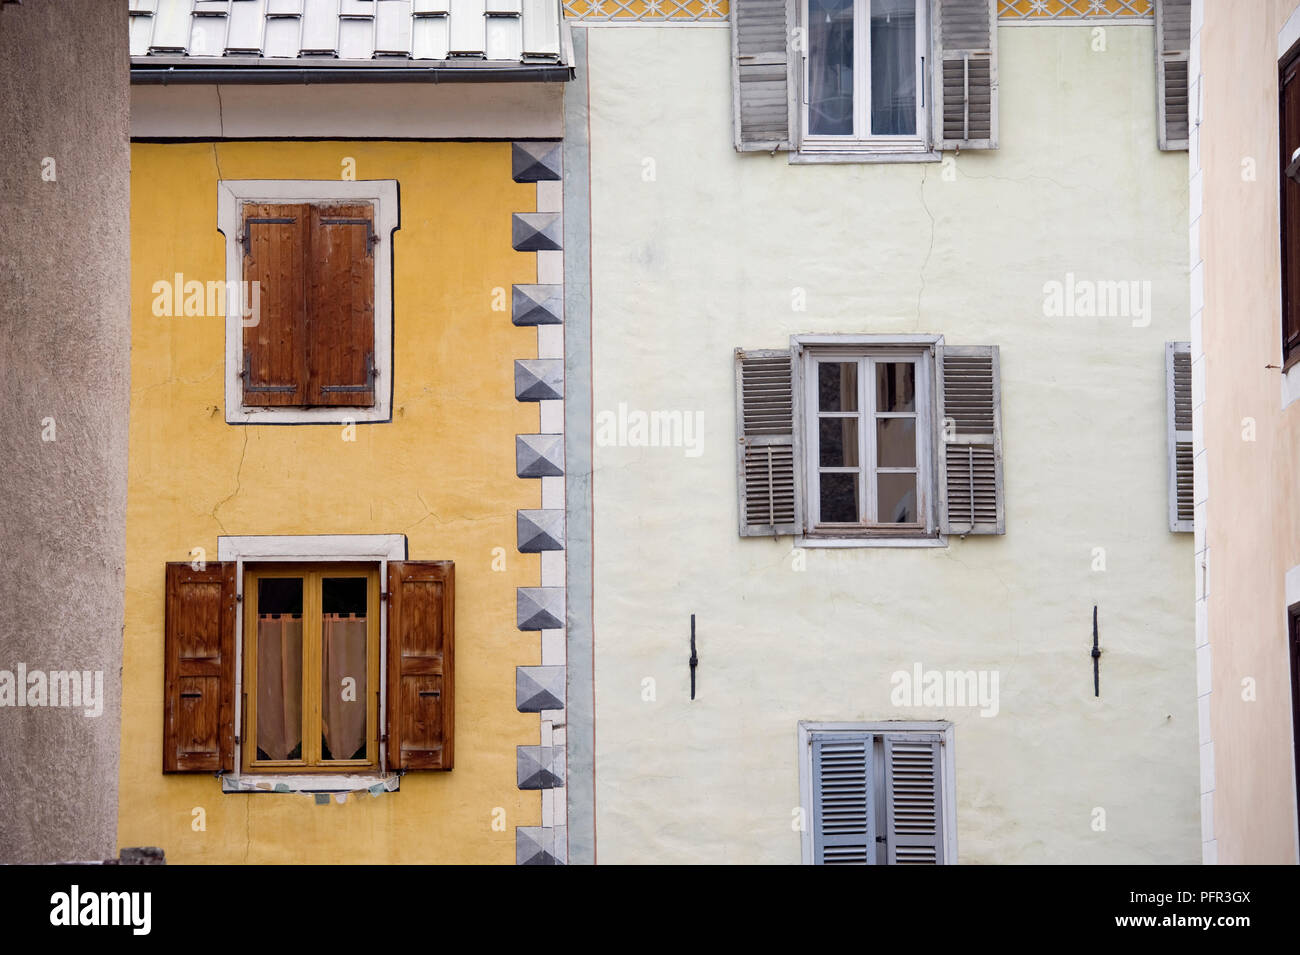 France, Cite Vauban, Place D'armes, facade of buildings with opens and closed shutters, close-up Stock Photo